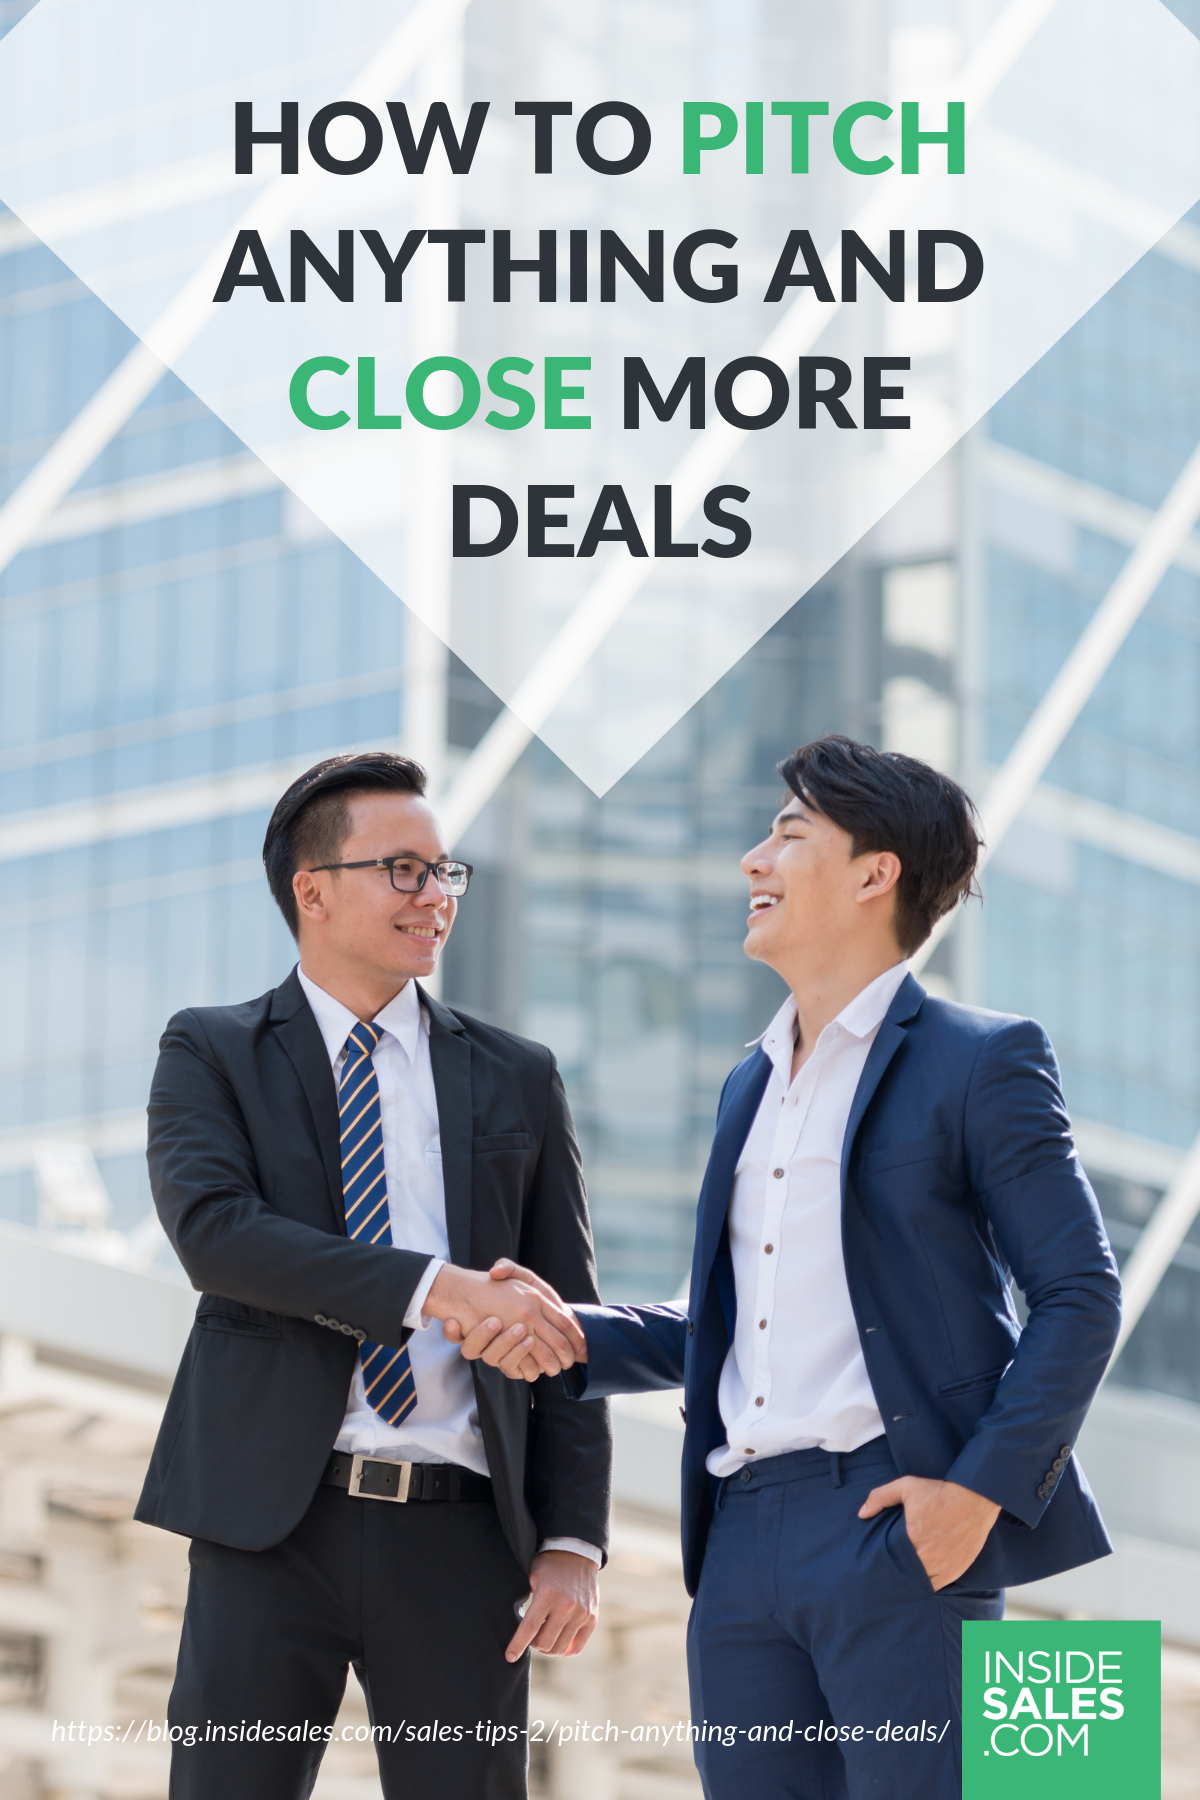 How To Pitch Anything And Close More Deals https://www.insidesales.com/blog/sales-tips-2/pitch-anything-and-close-deals/